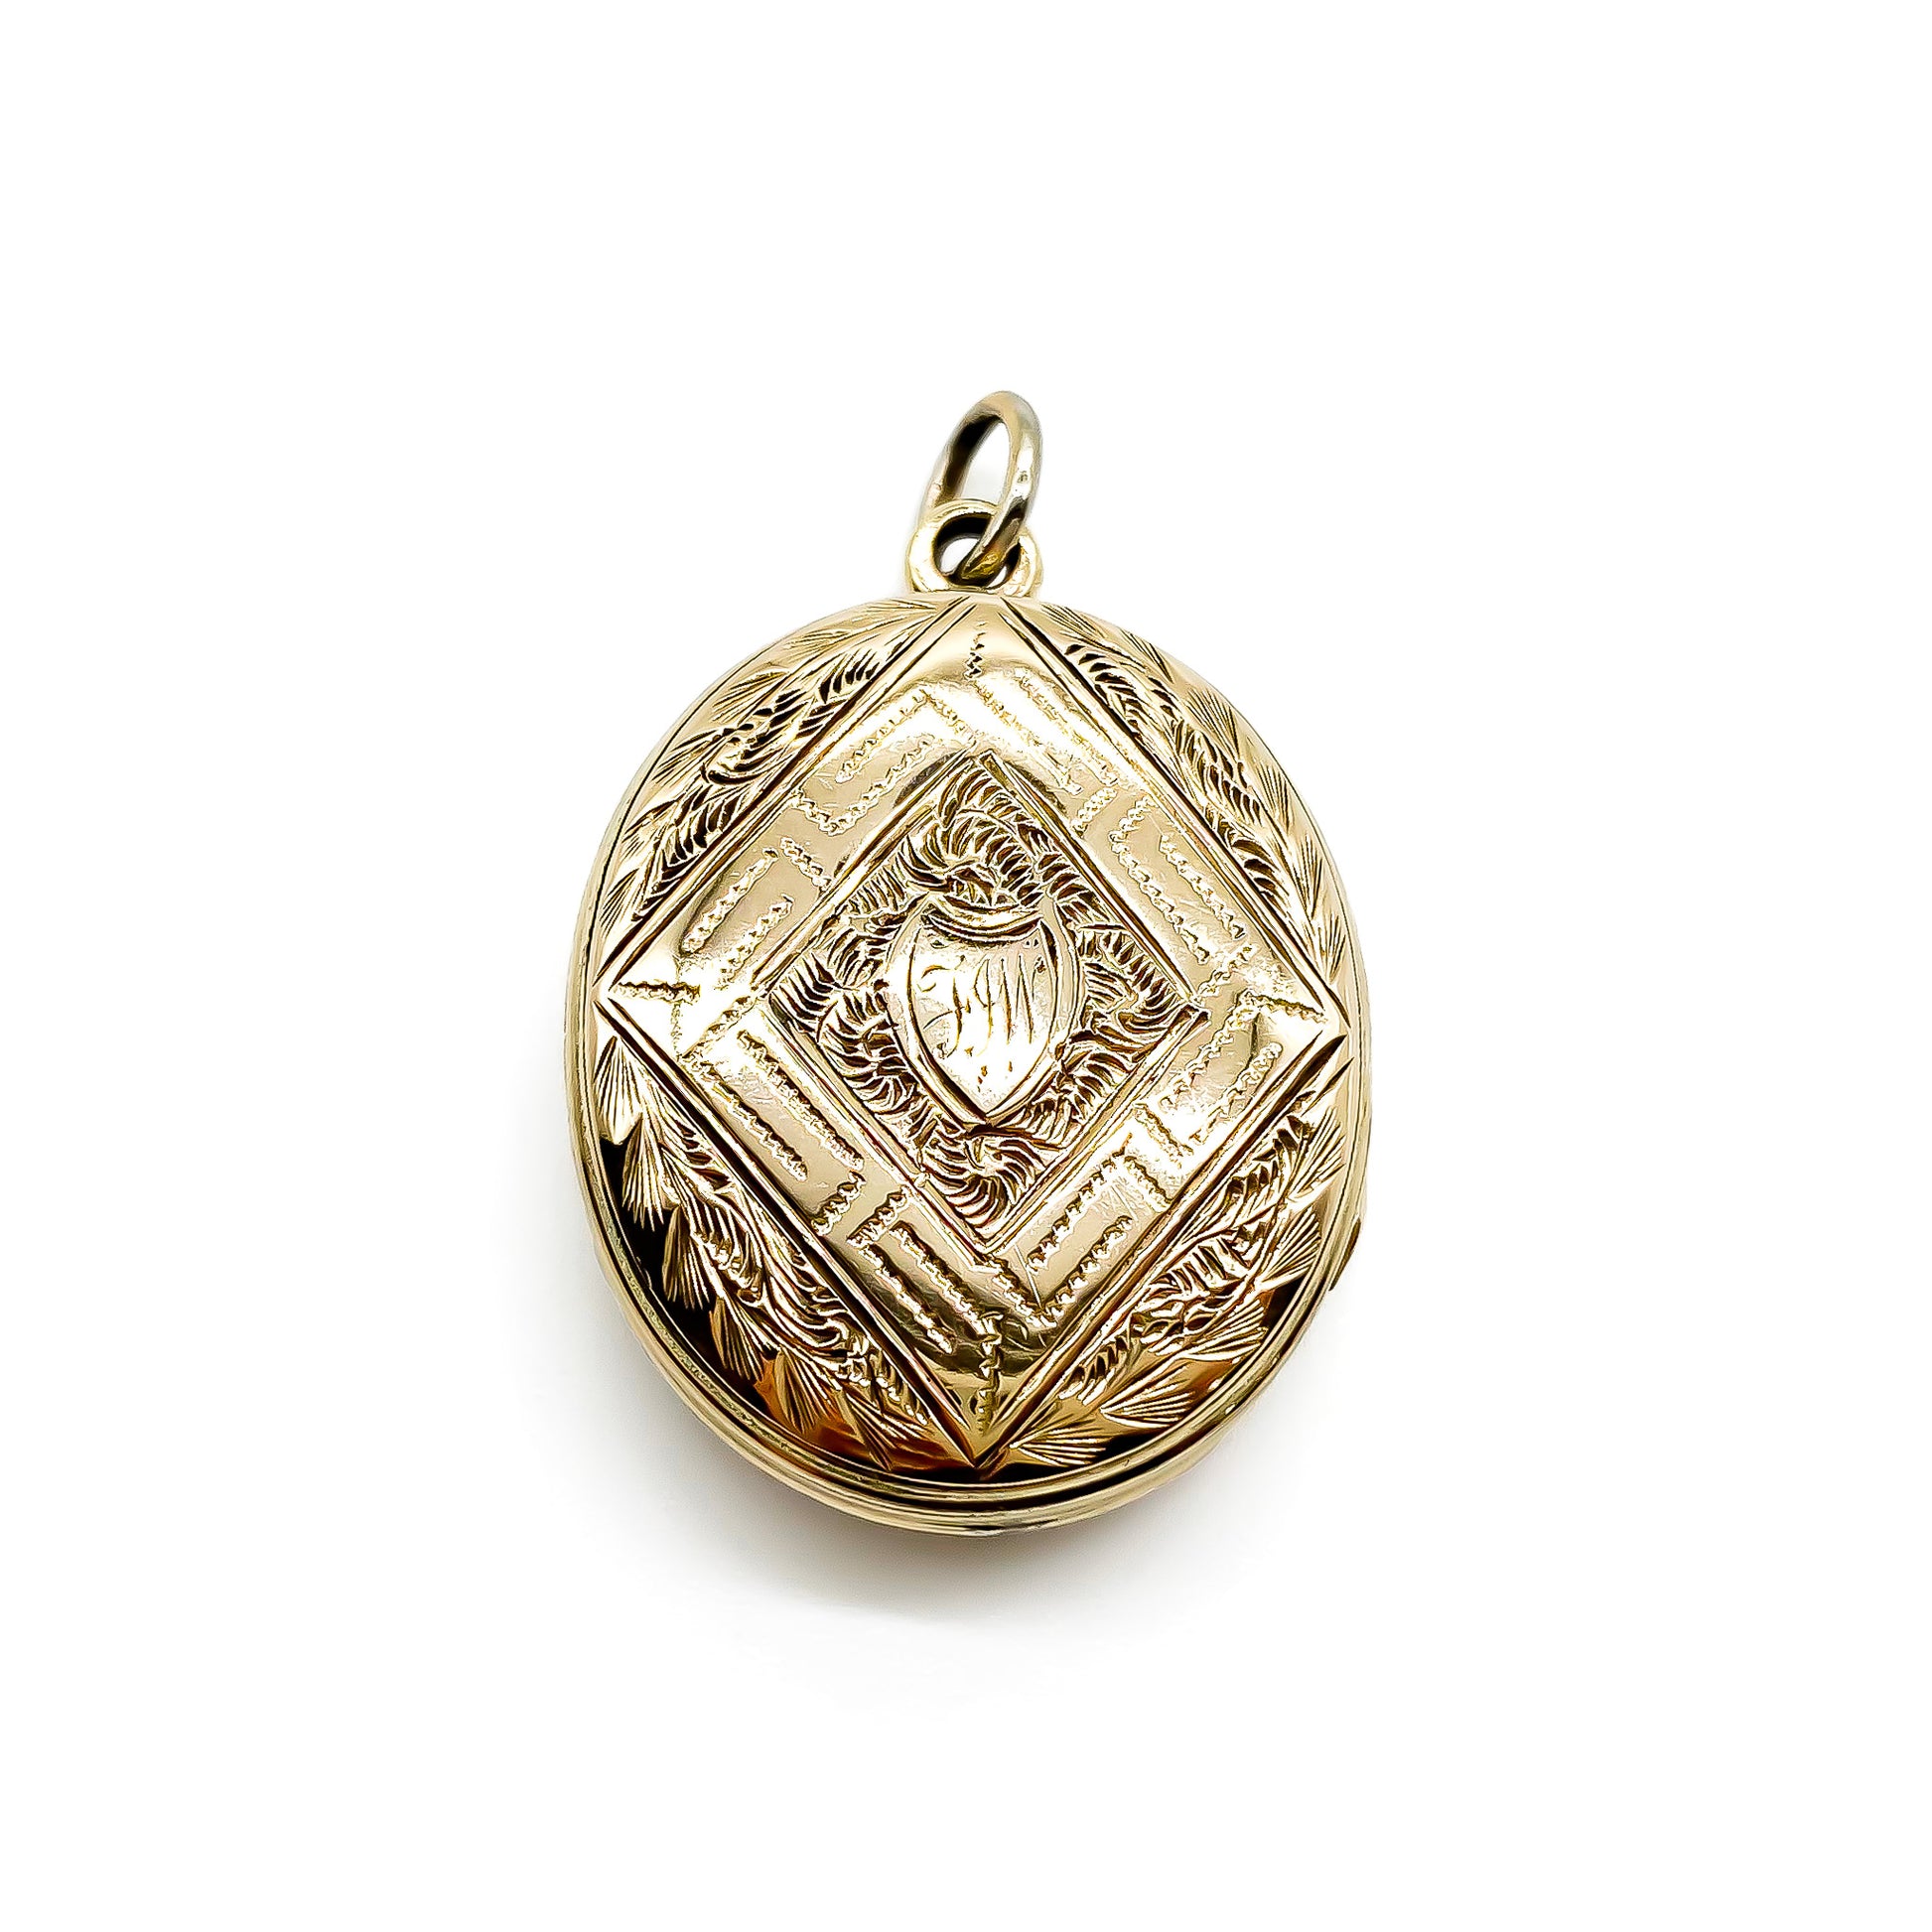 Beautifully engraved Victorian black and white enamelled gold-cased mourning locket.